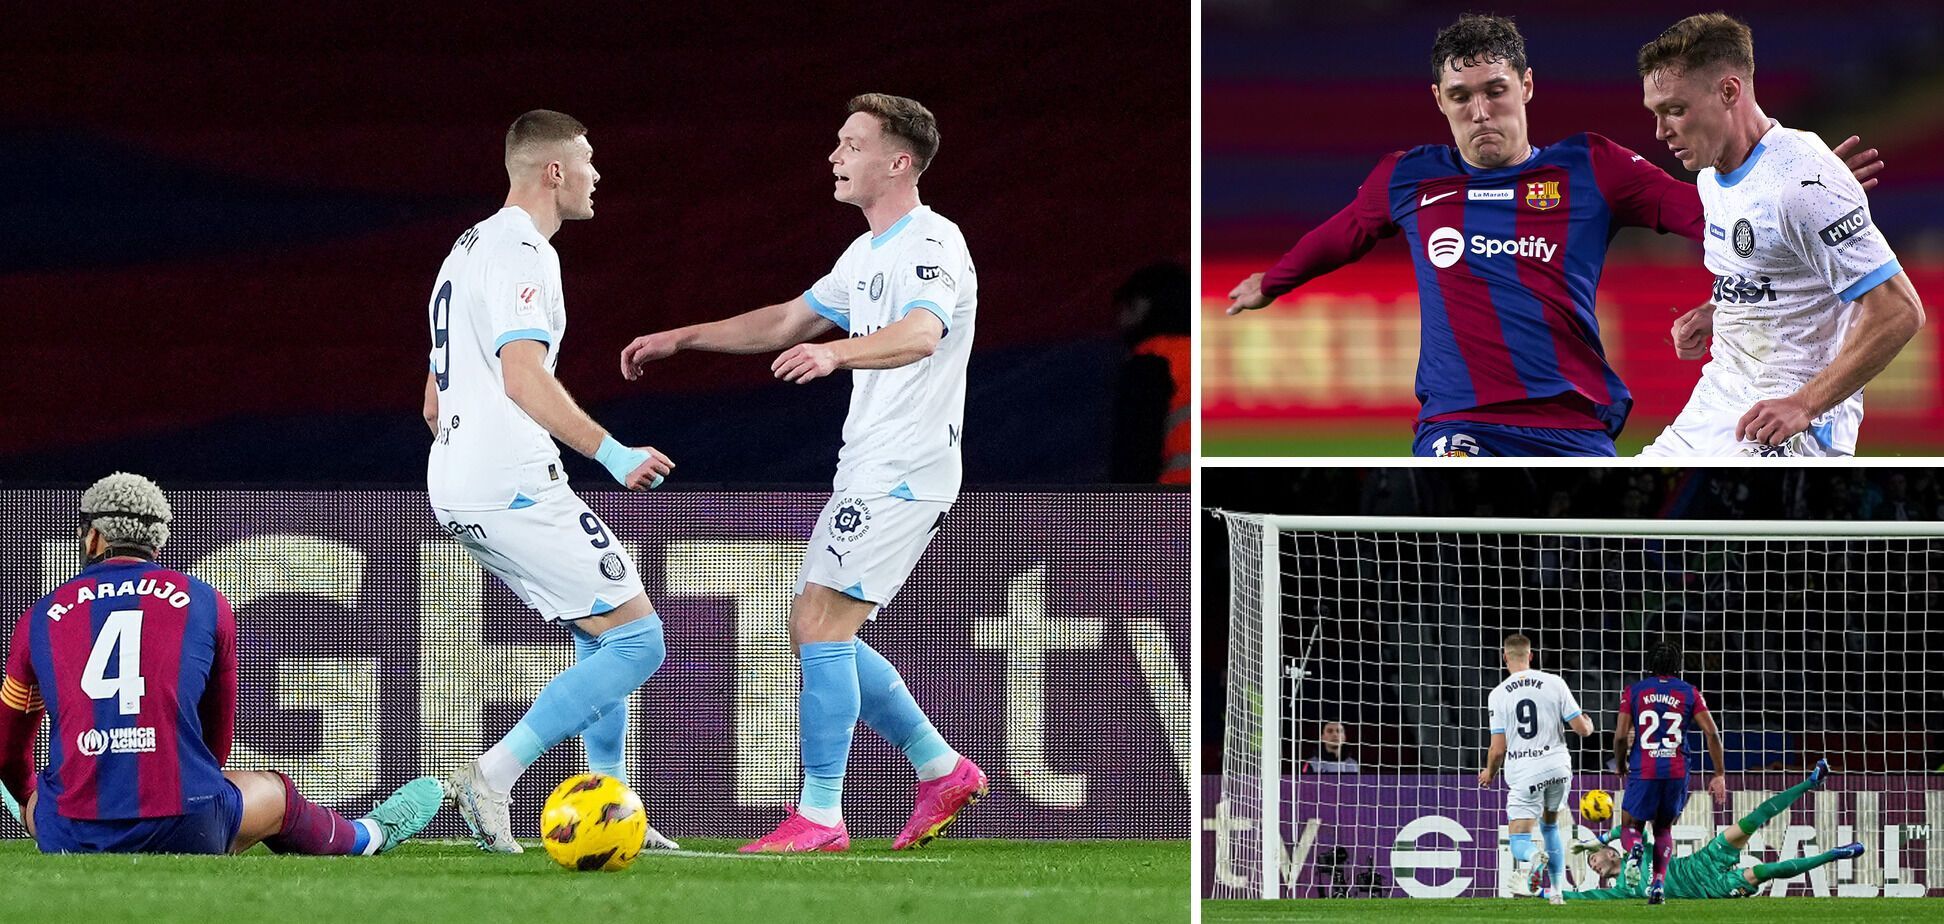 The footballer of the national team of Ukraine scored against Barcelona in the 4th minute of the match in La Liga, repeating the record of the century. Video